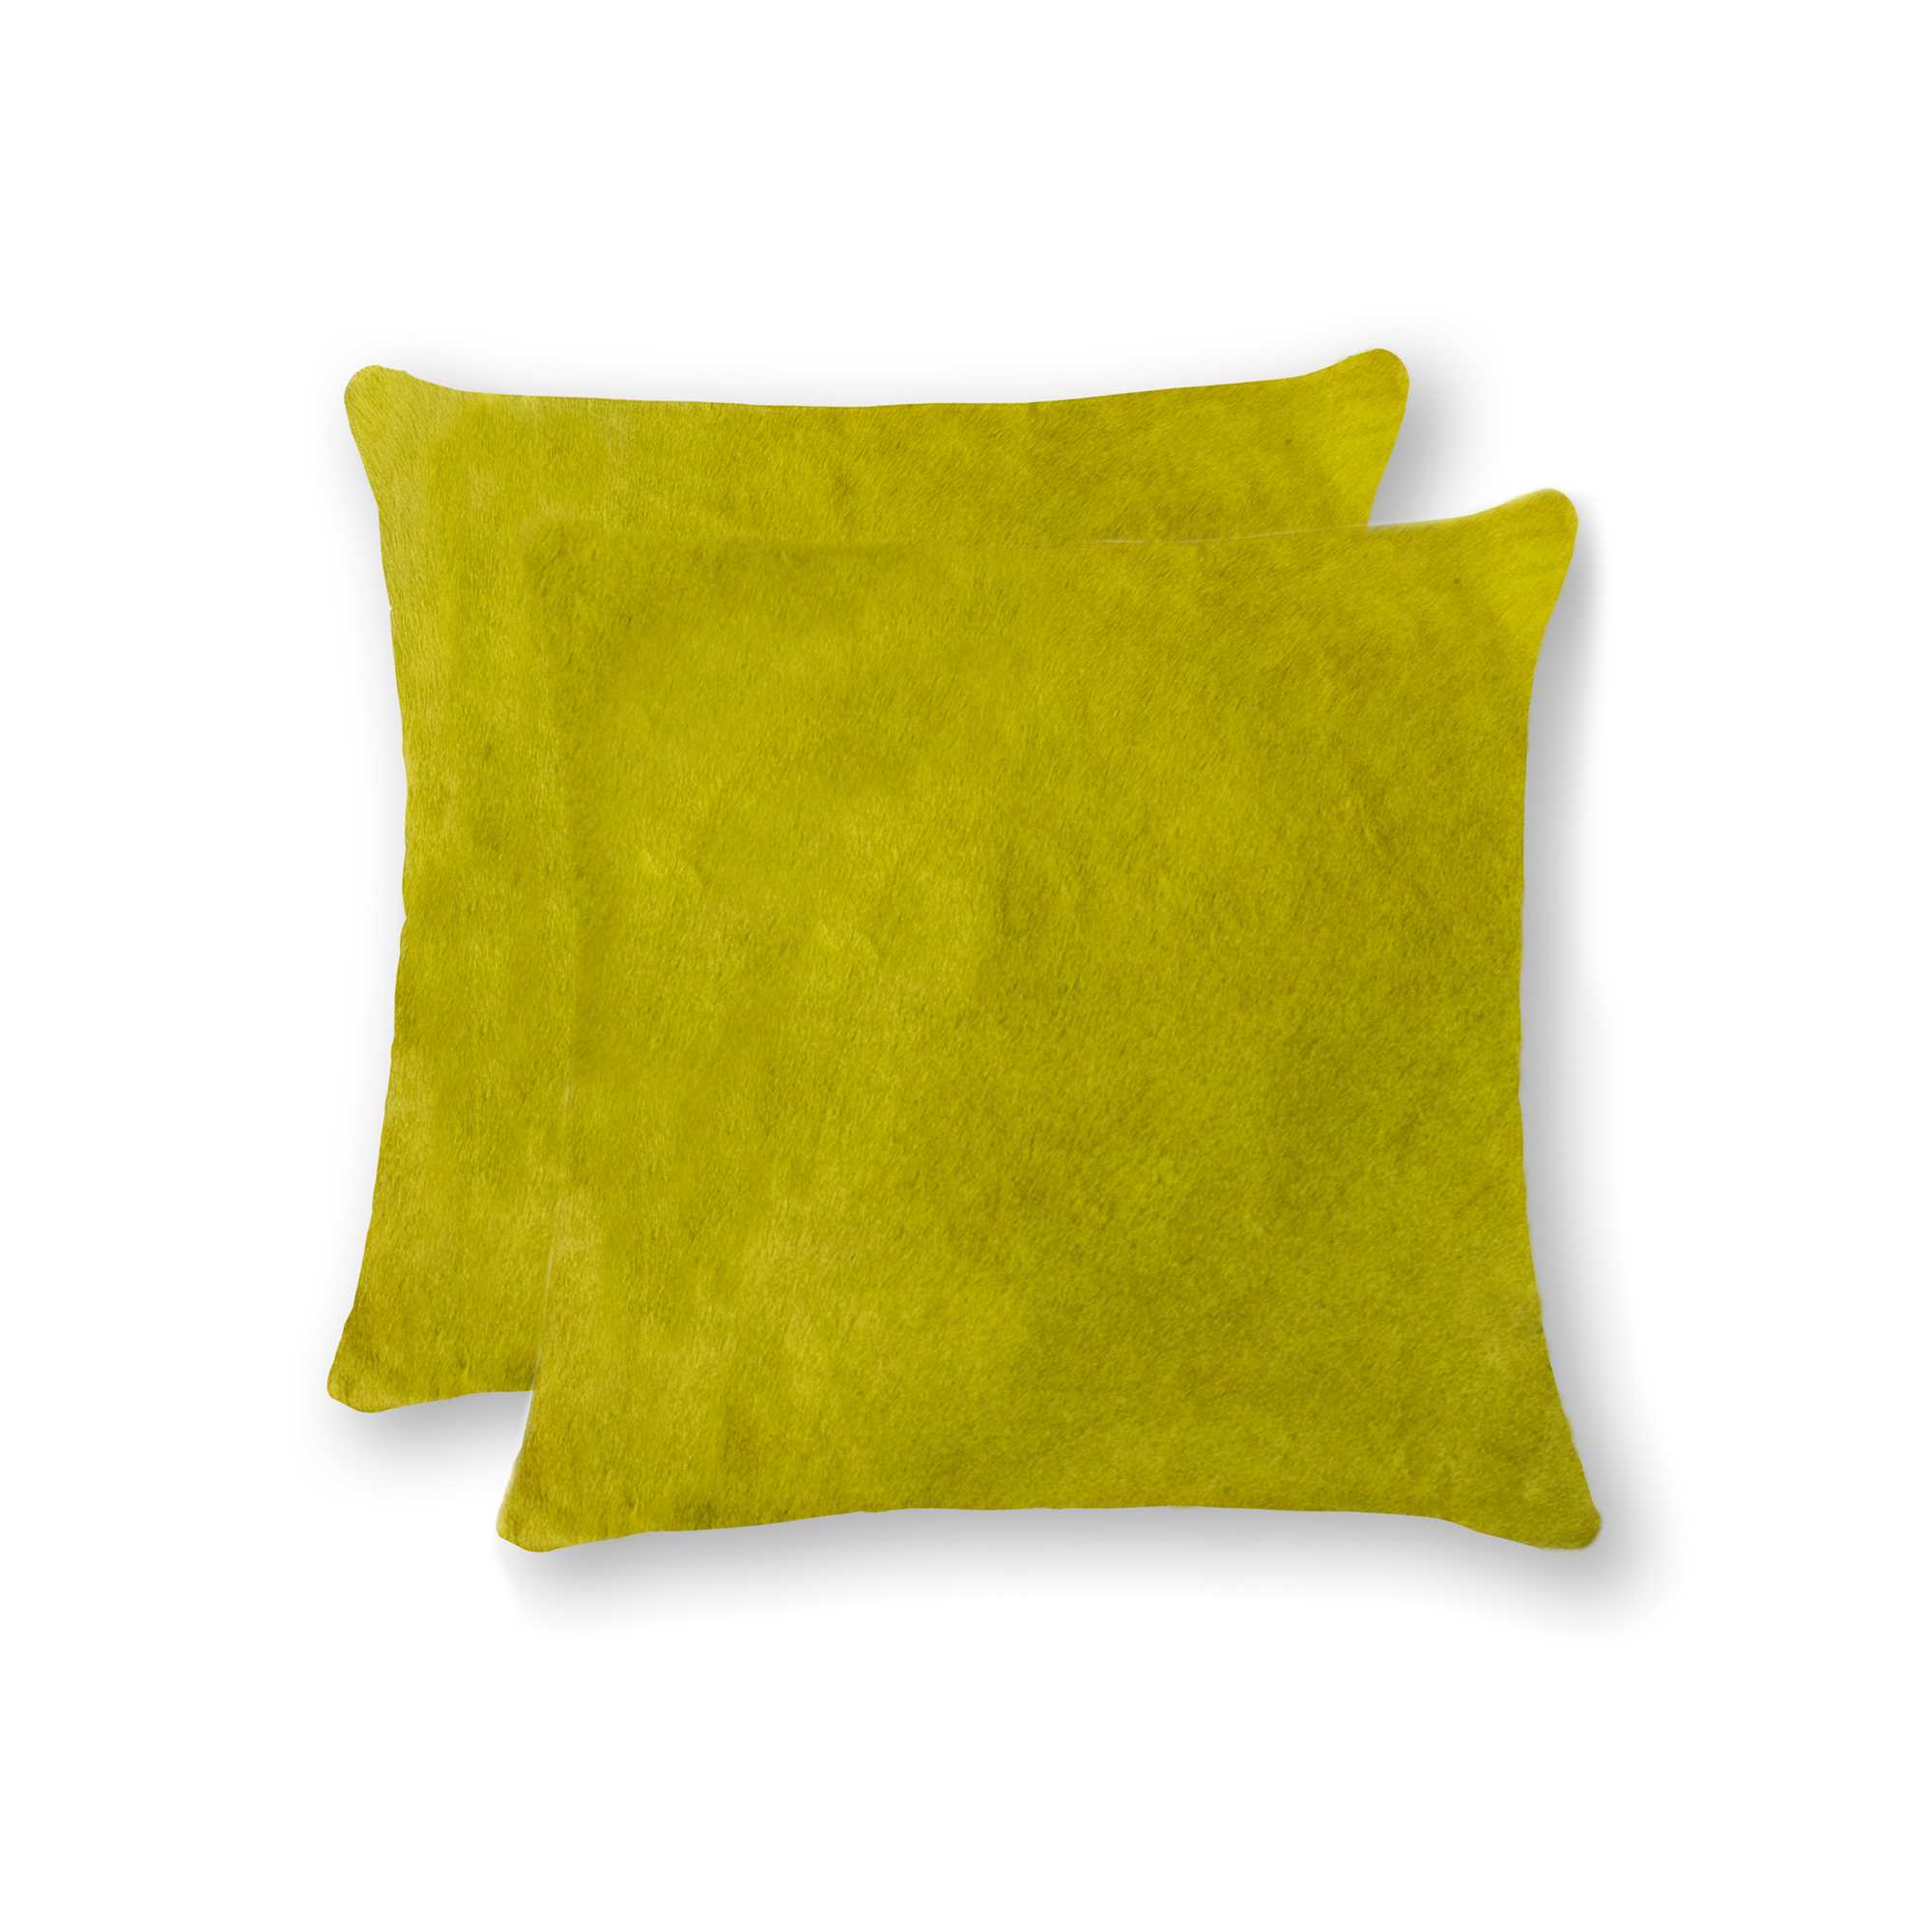 18" x 18" x 5" Yellow Cowhide - Pillow 2-Pack